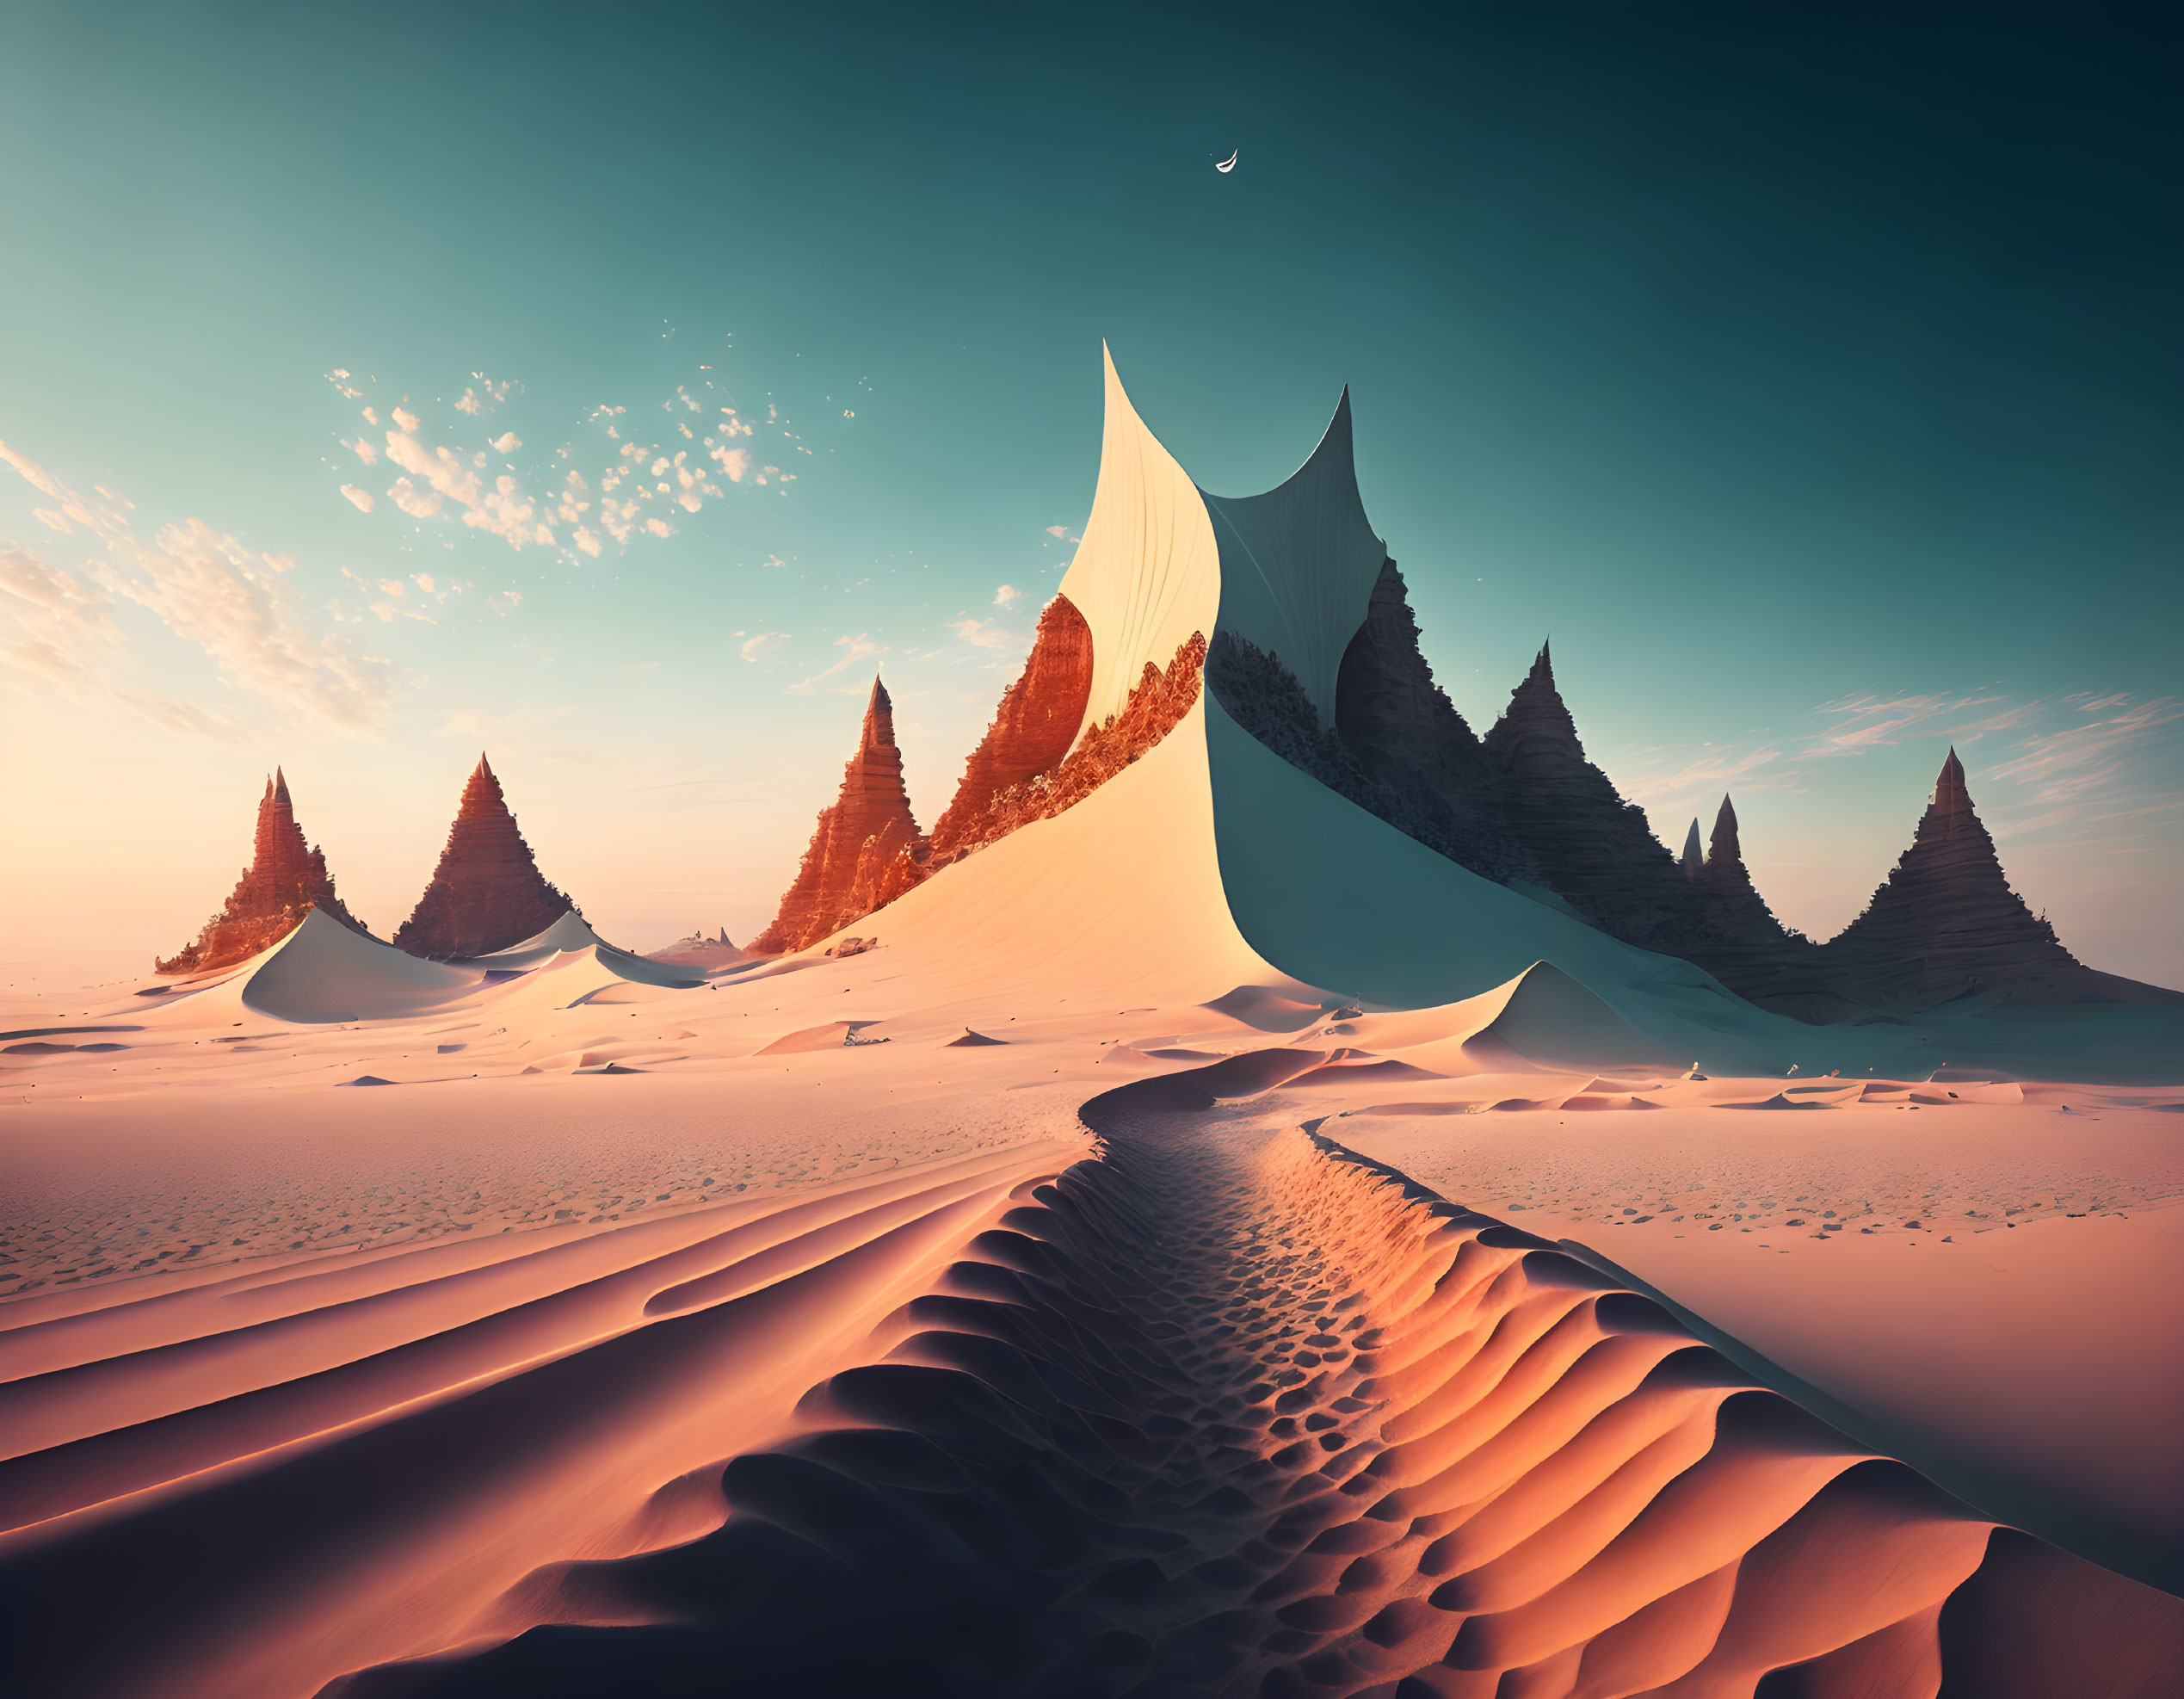 Surreal landscape with towering dunes and cone-shaped formations under a crescent moon-lit sky